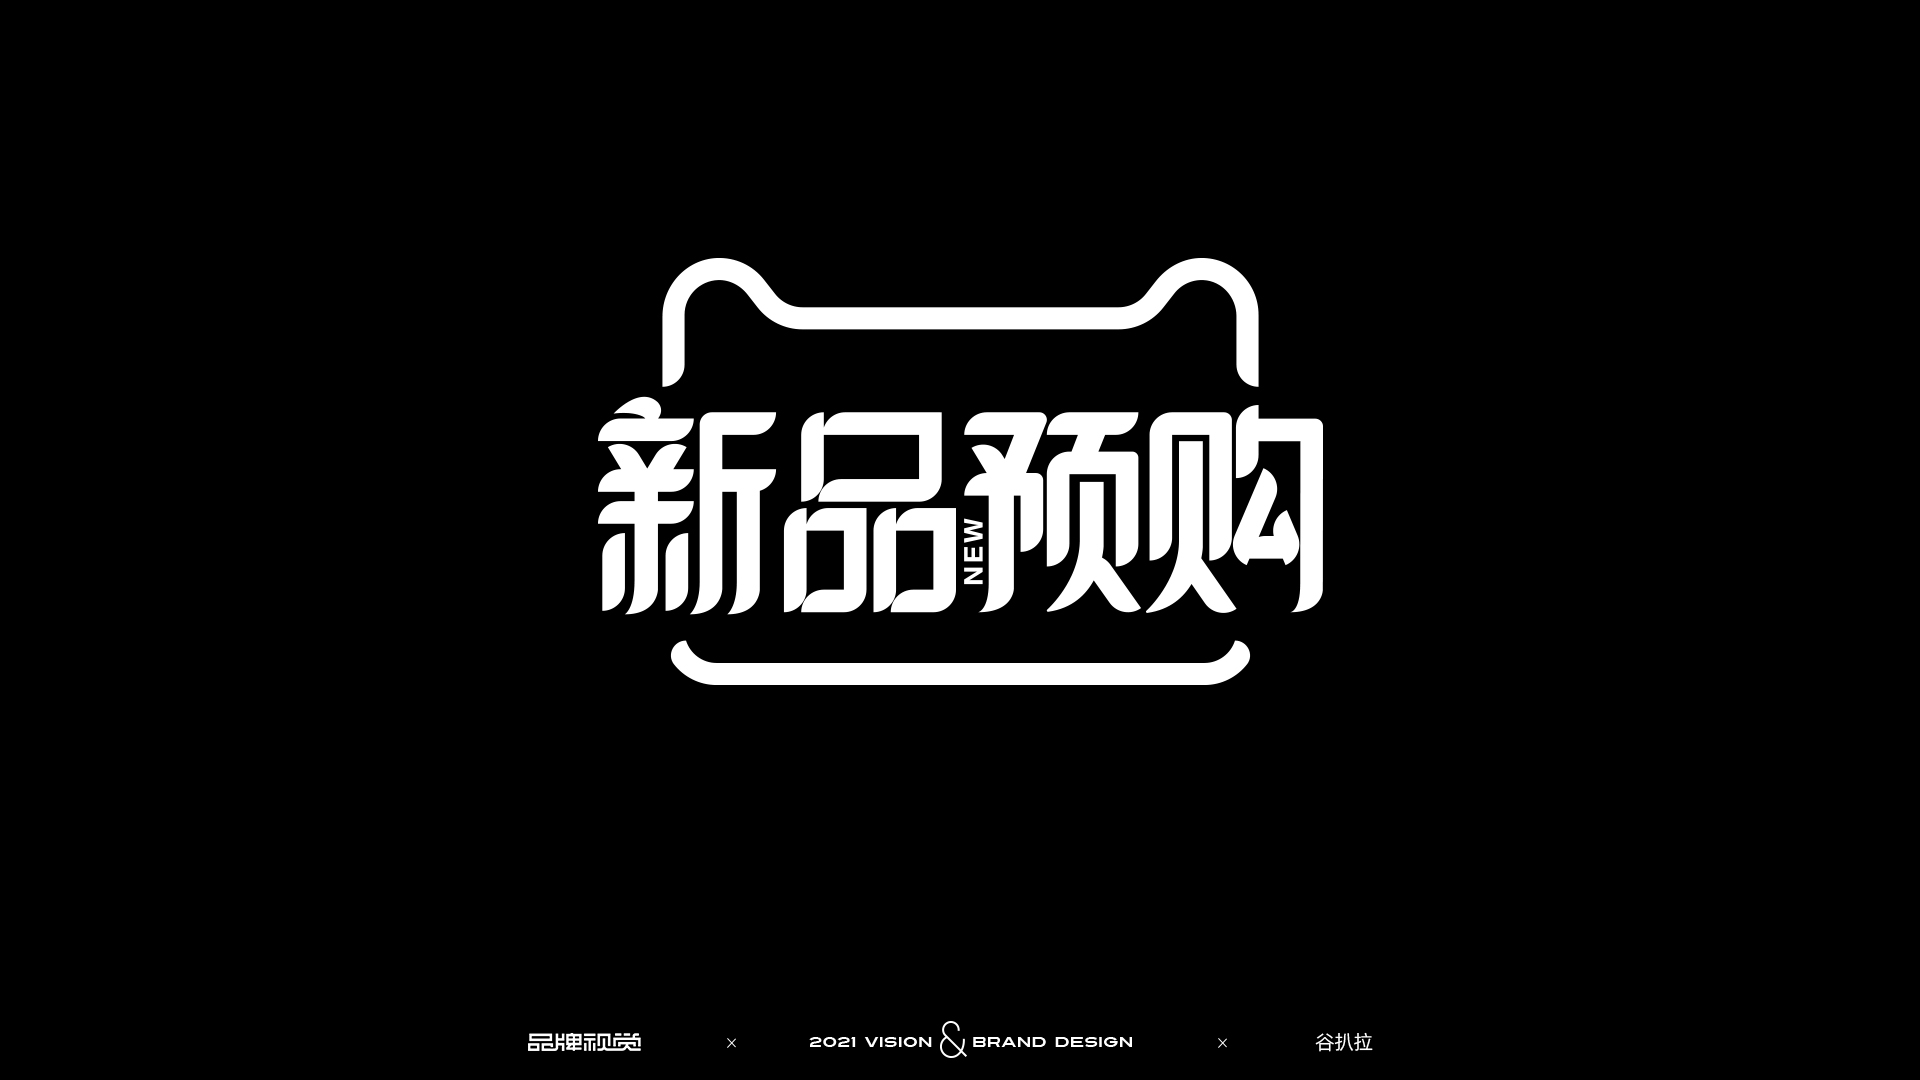 15P Collection of the latest Chinese font design schemes in 2021 #.517